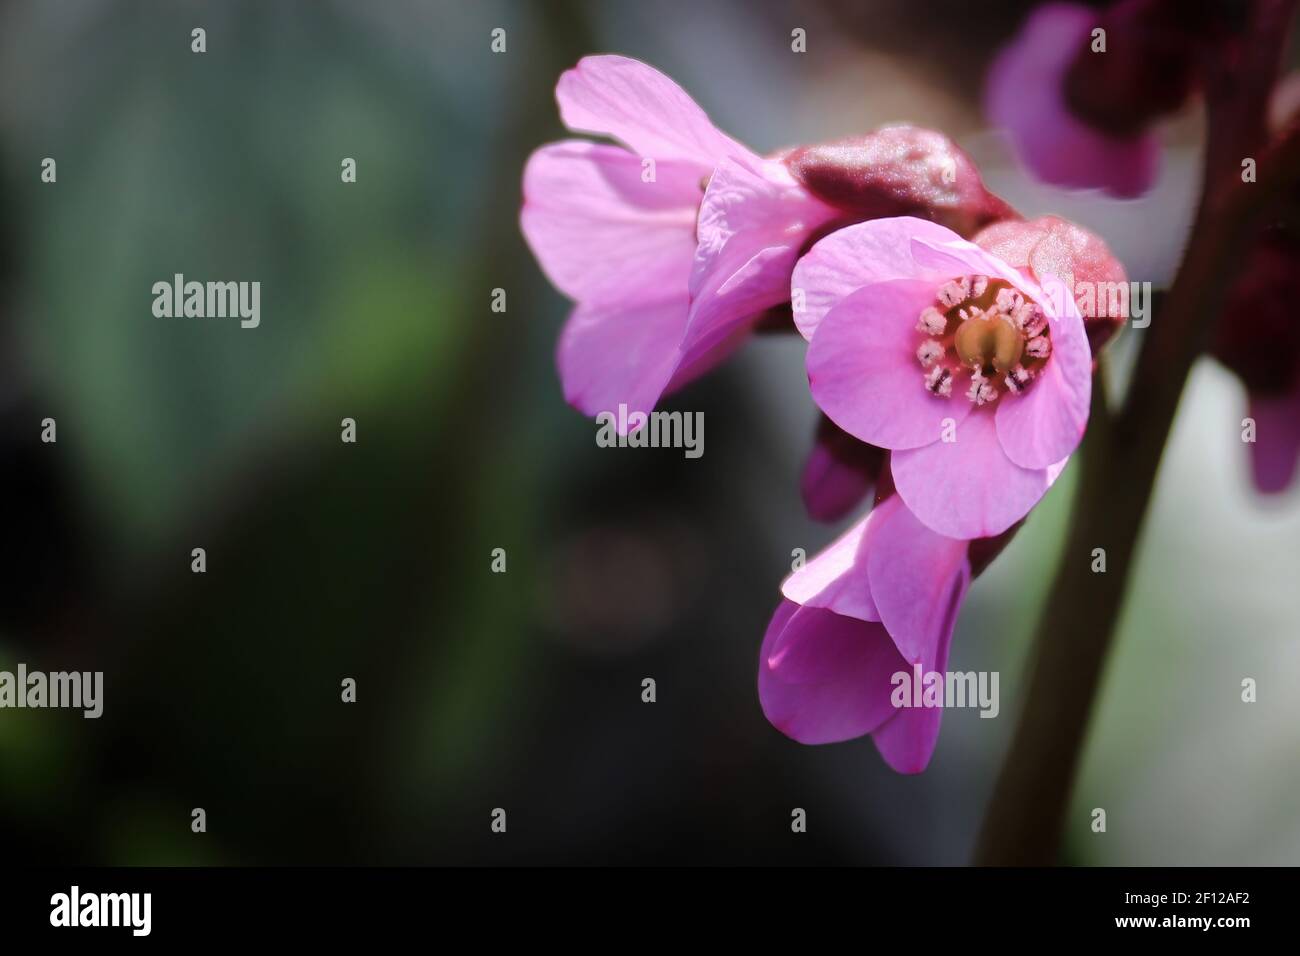 Macro view of bergina trumpet blossoms in bloom Stock Photo